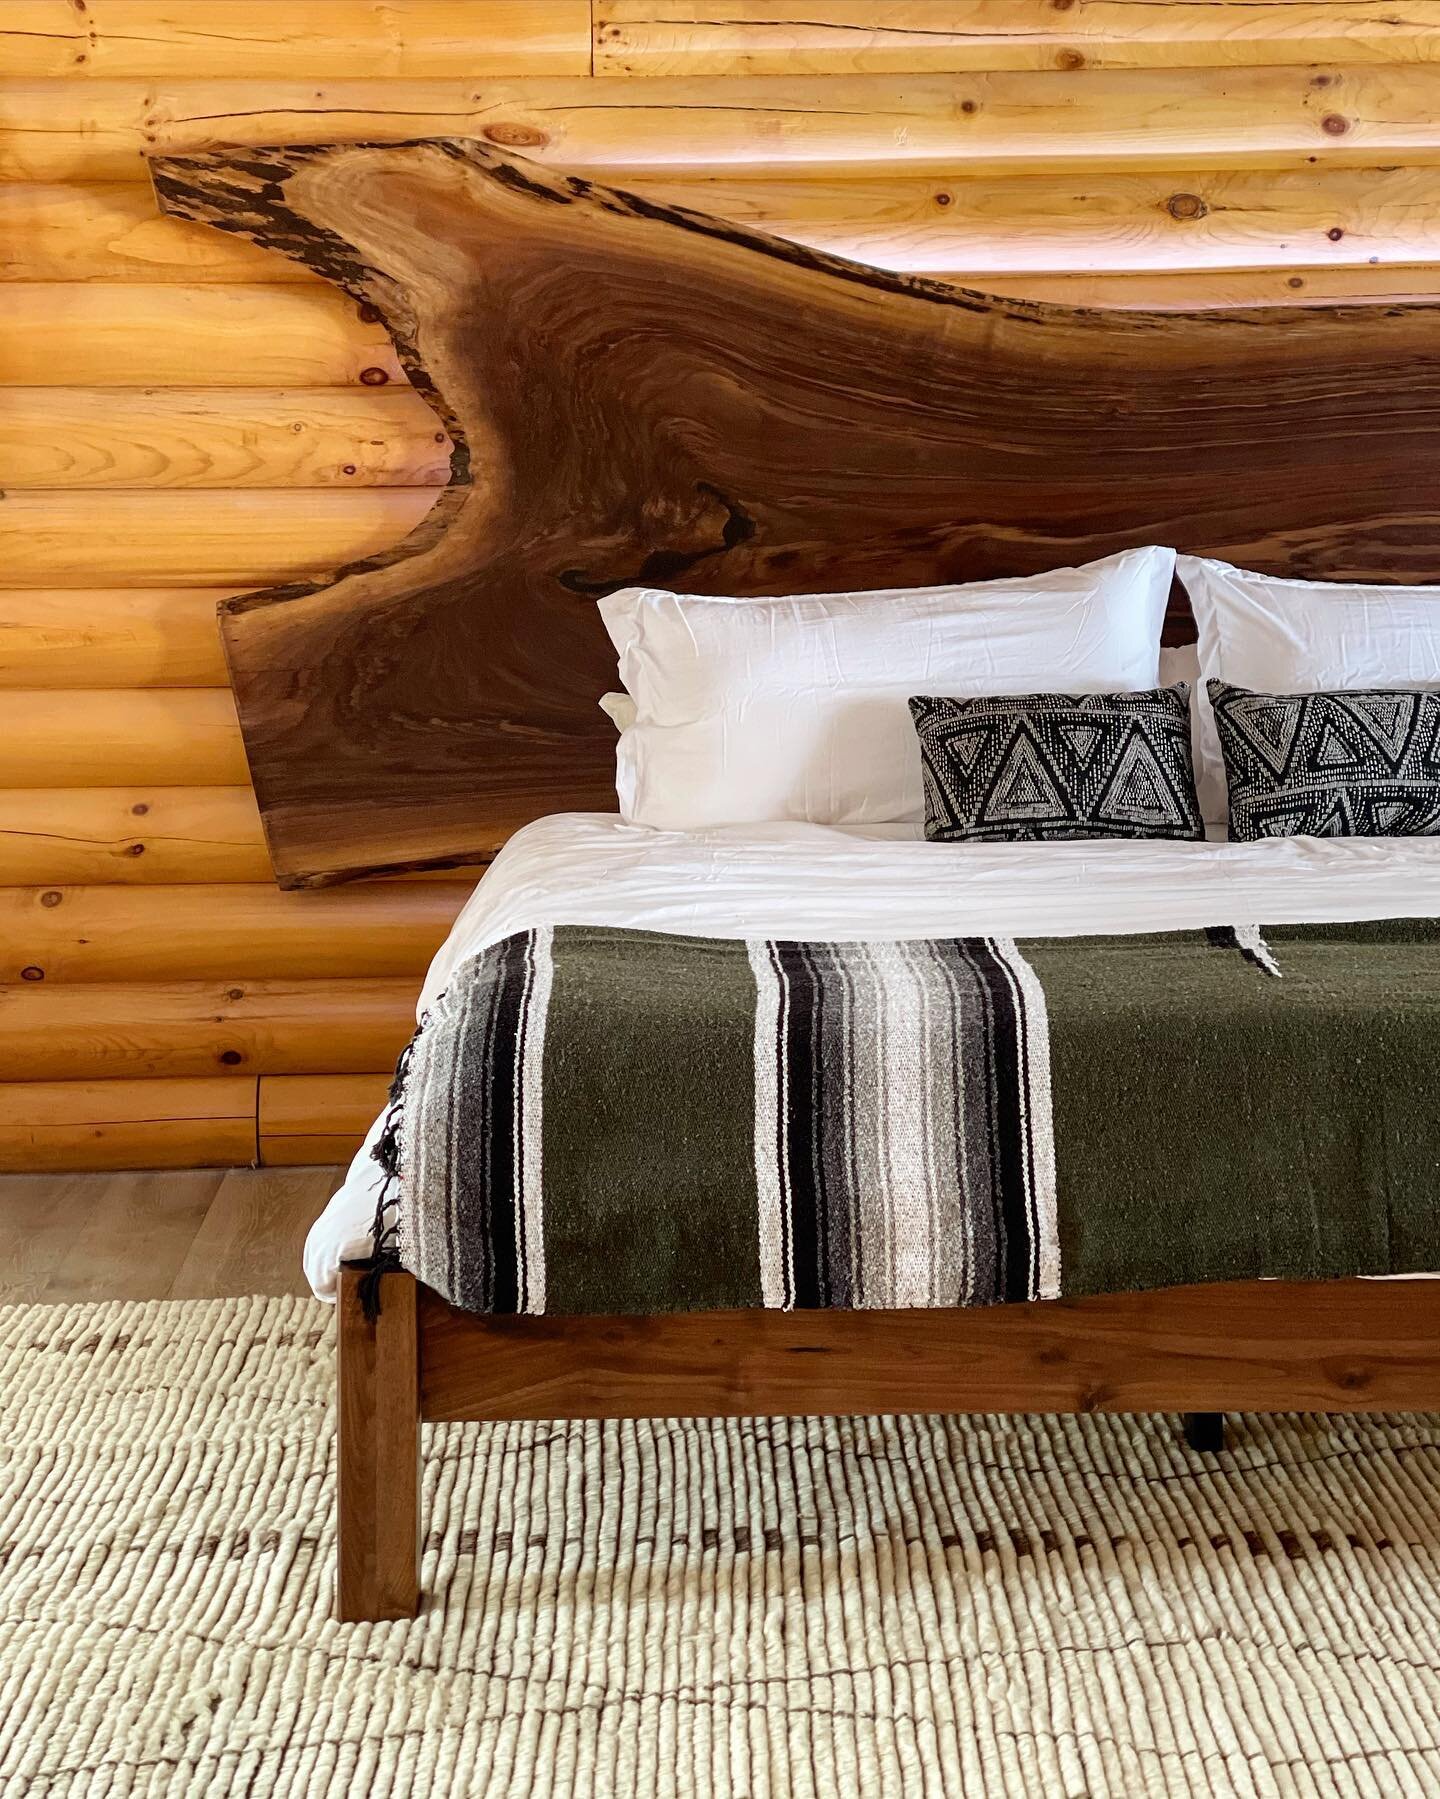 All the finishing touches are coming together and we have some of the best craftsmen in the Midwest bringing their talent and skill to The Hillside. Today our friends at @handcraftingohio installed this black walnut bed frame and live edge headboard 